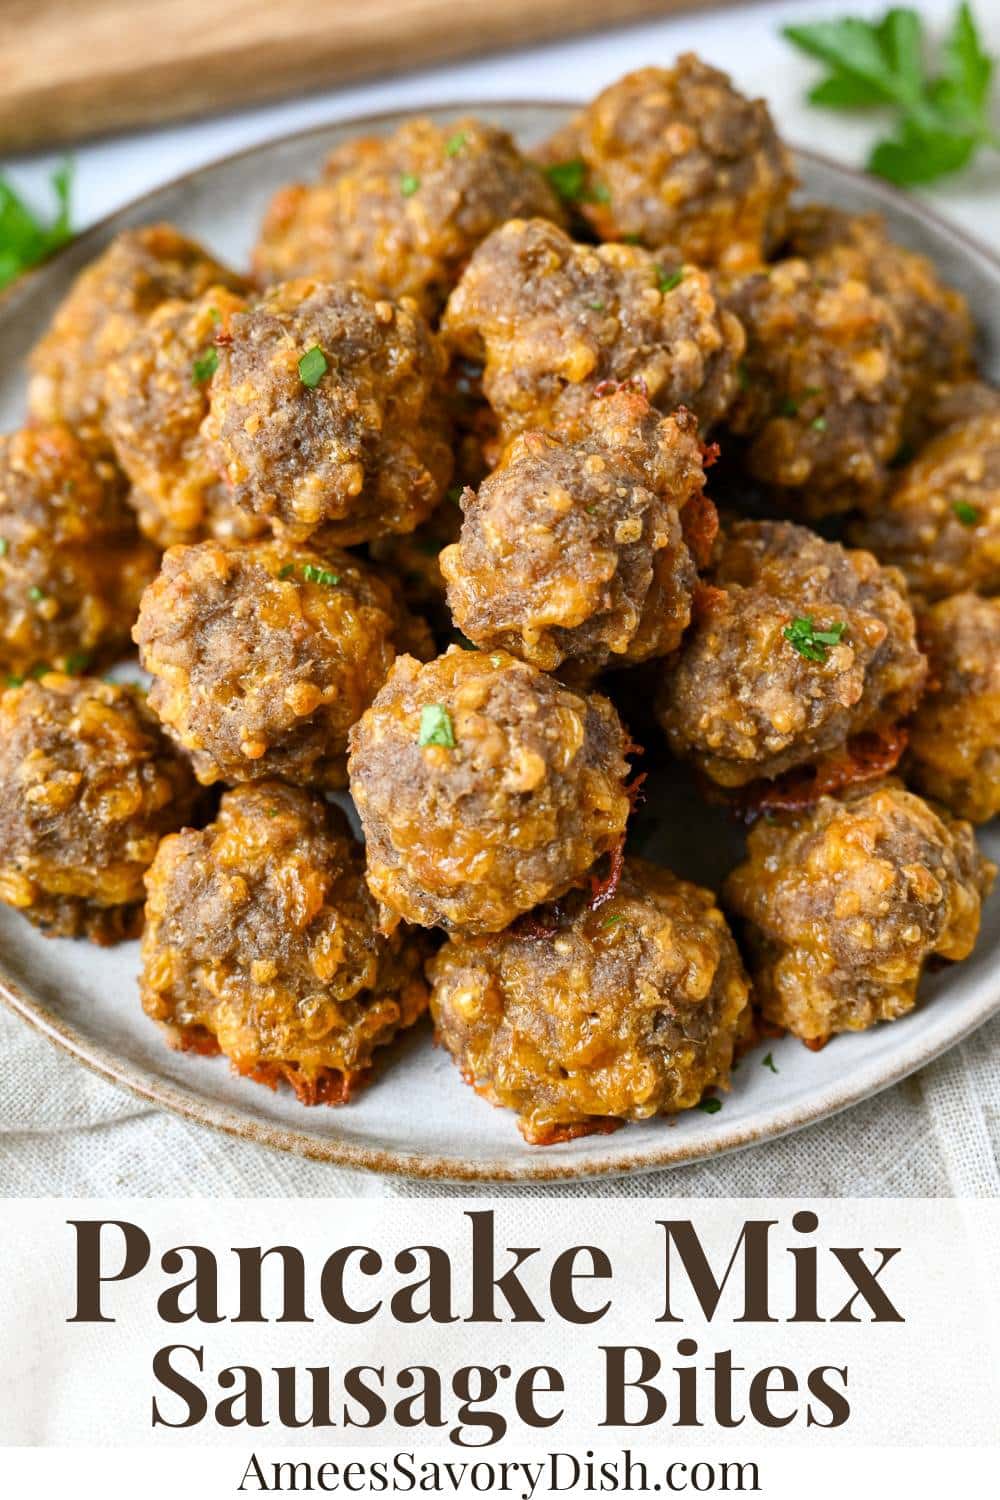 Learn how to make THE BEST Pancake Sausage Bites with protein pancake mix, savory sausage, creamy sharp cheddar, and flavorful spices. Ready in under 30 minutes! via @Ameessavorydish